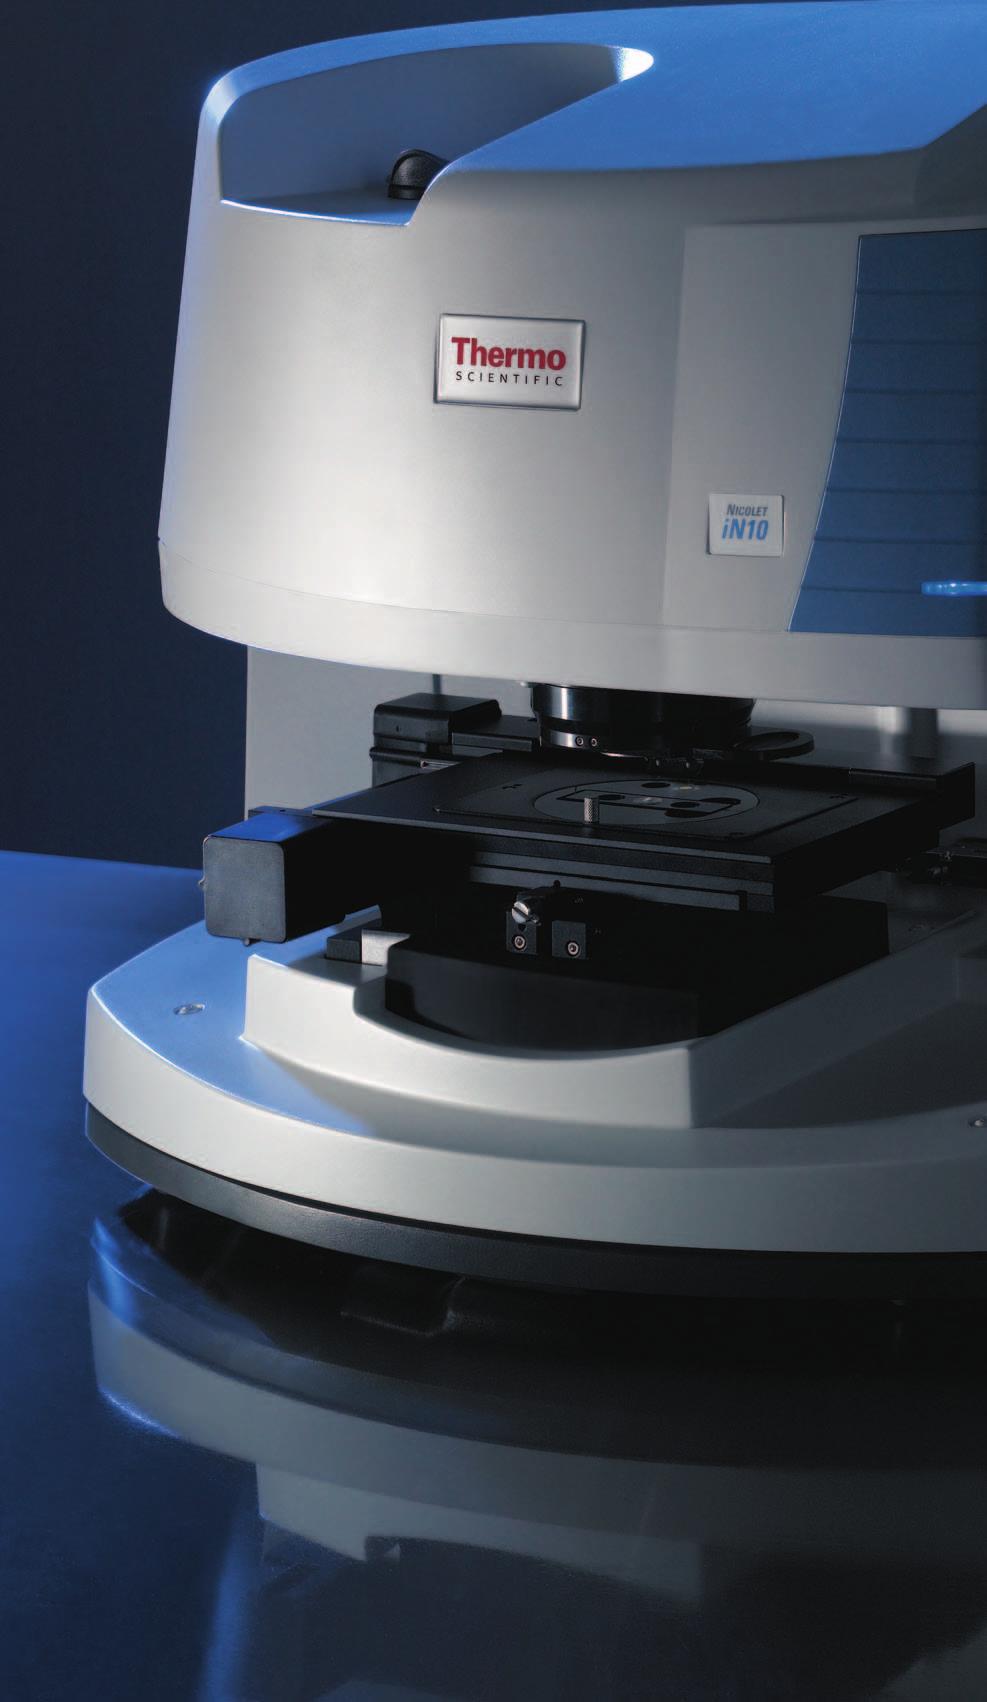 Nicolet in10 Microscopy Redefined The Thermo Scientific Nicolet in10 FT-IR microscope is integrated, innovative and intuitive beyond what you have come to expect from an infrared microscope.